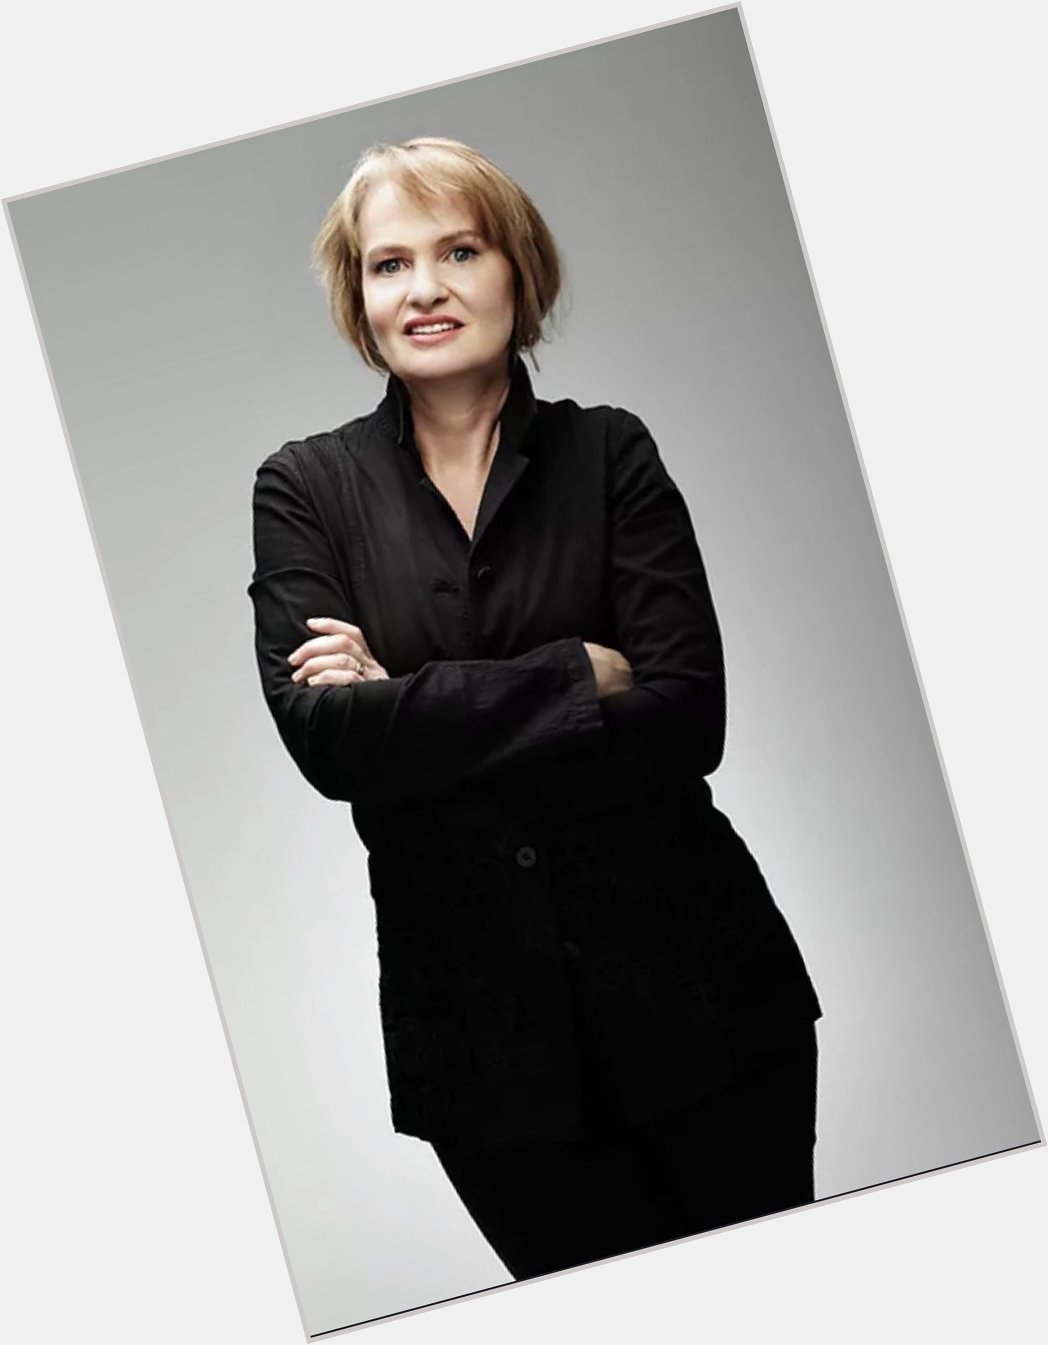 Happy birthday to the brilliant composer, arranger, producer and performer, Anne Dudley. 